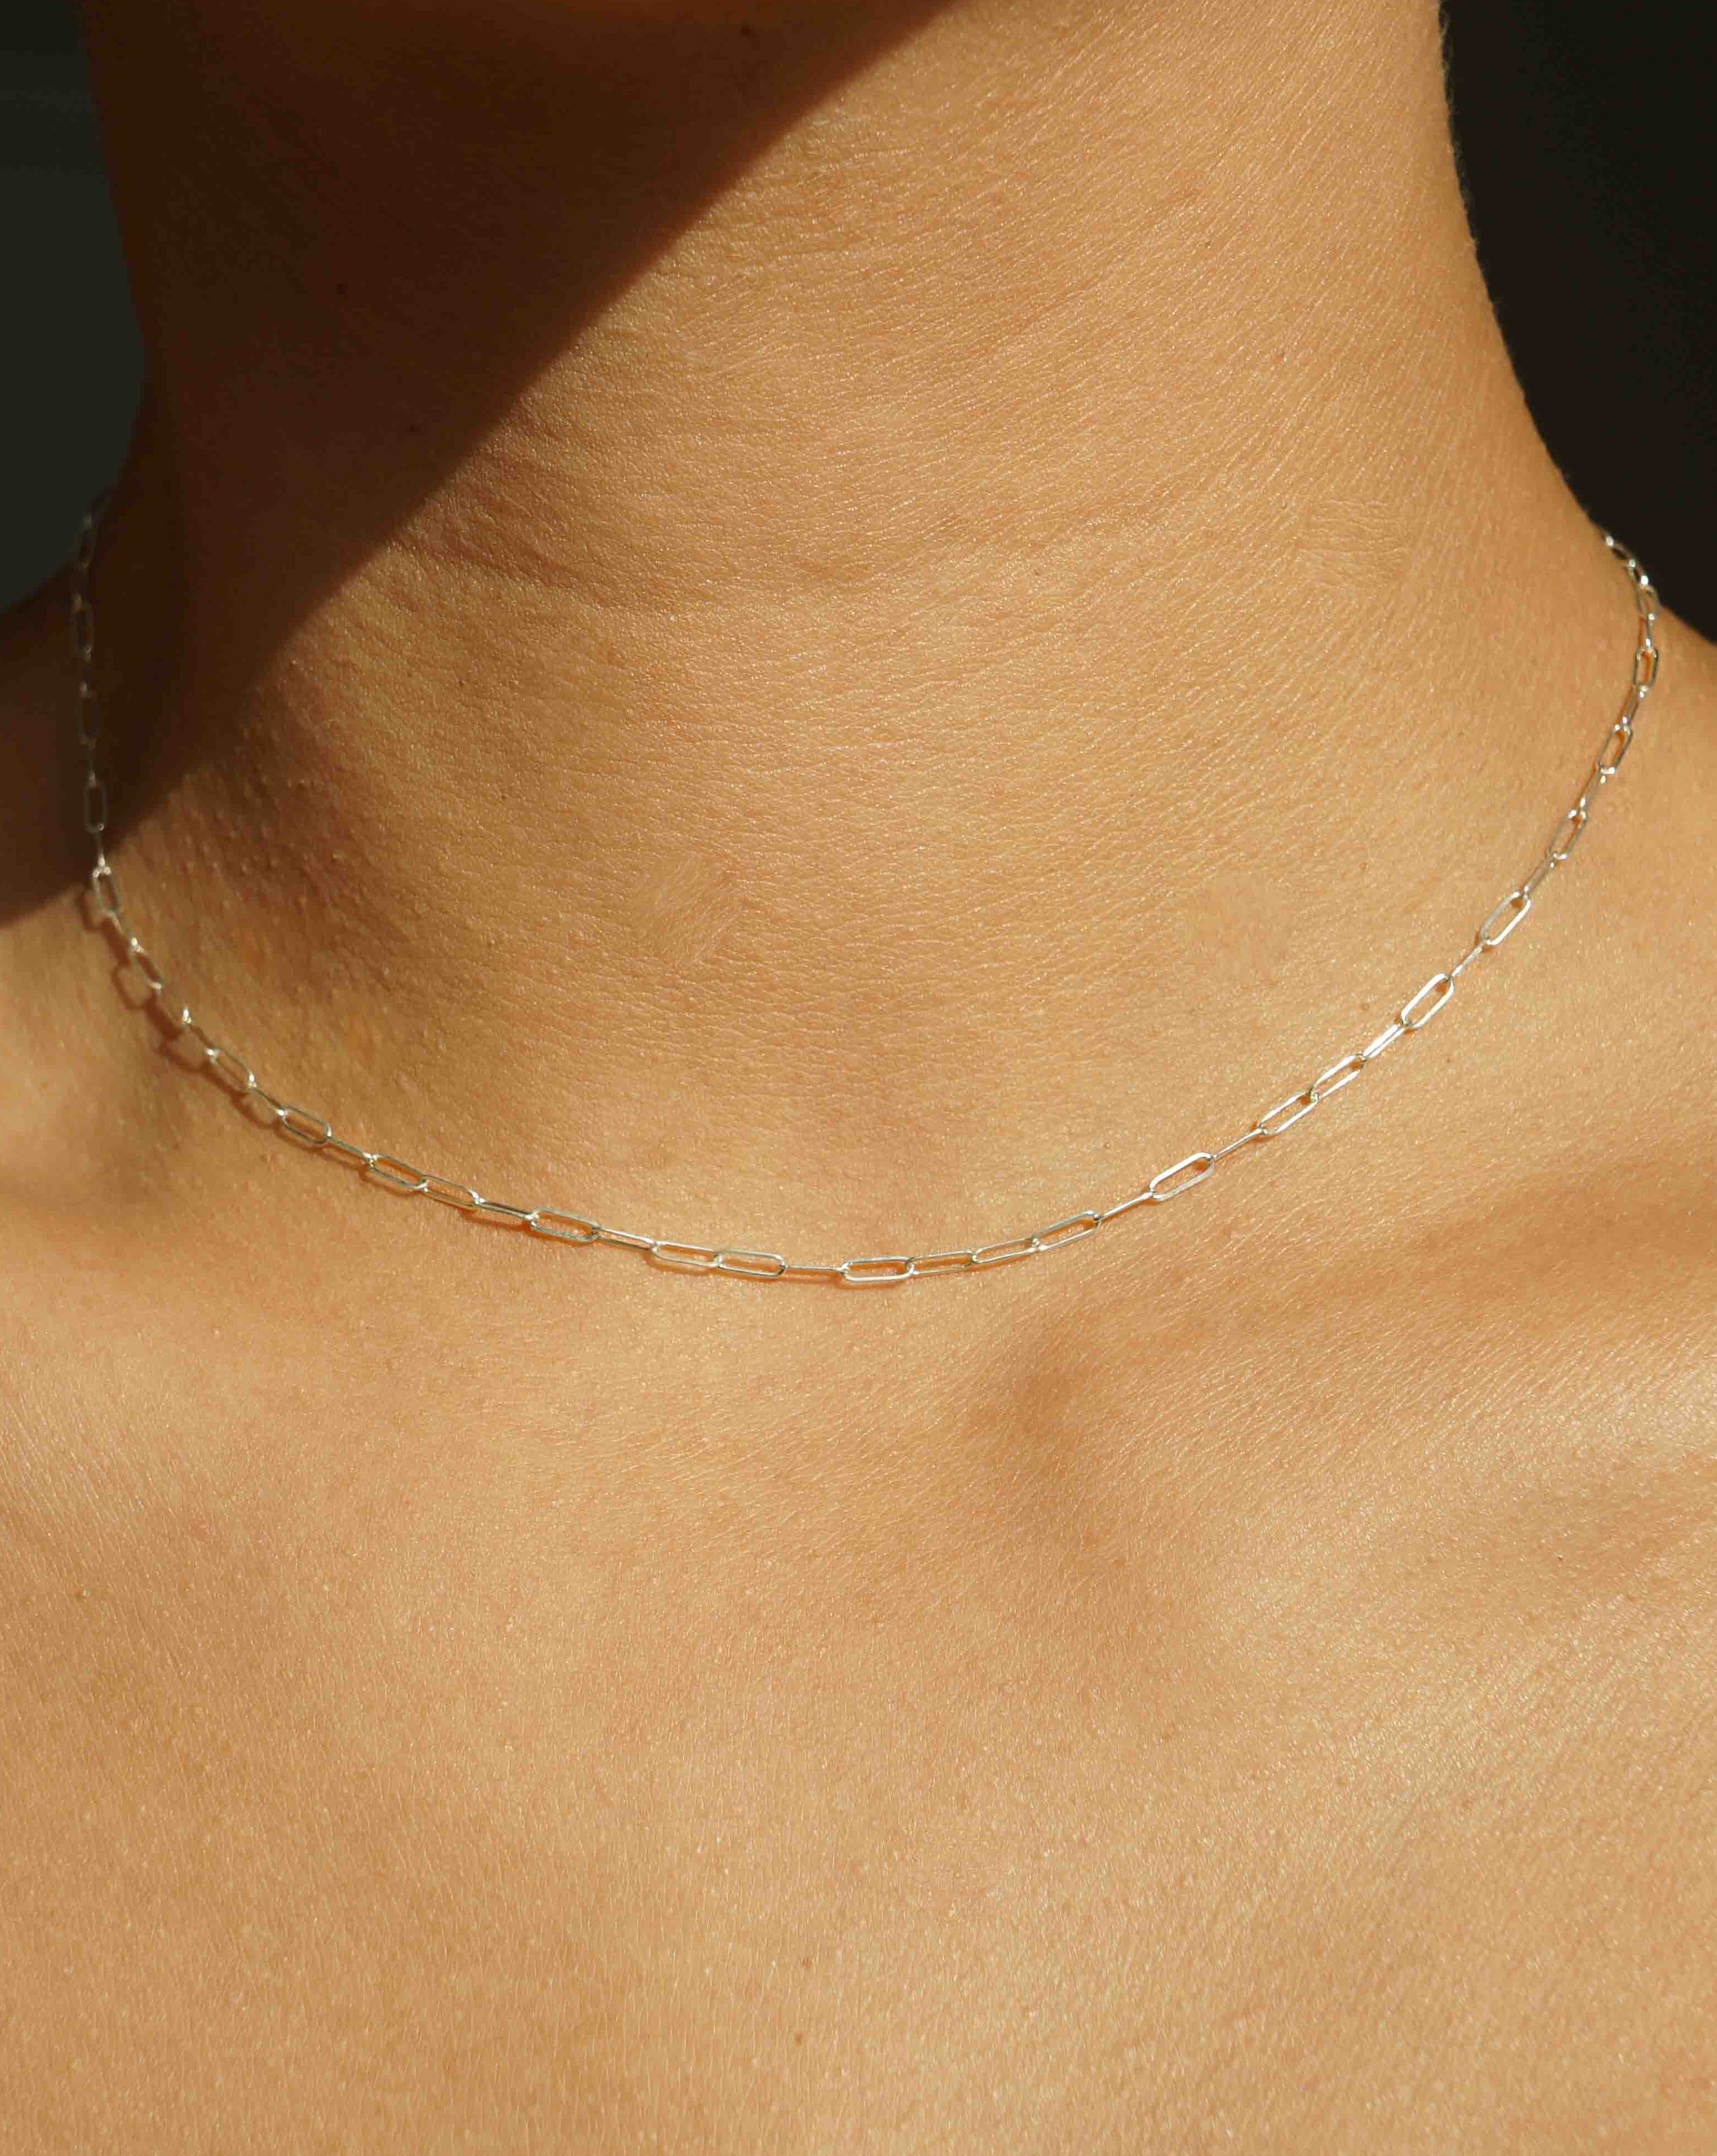 Blaire Chain Necklace by KOZAKH. A 15 to 17 inch adjustable length chain necklace in Sterling Silver.